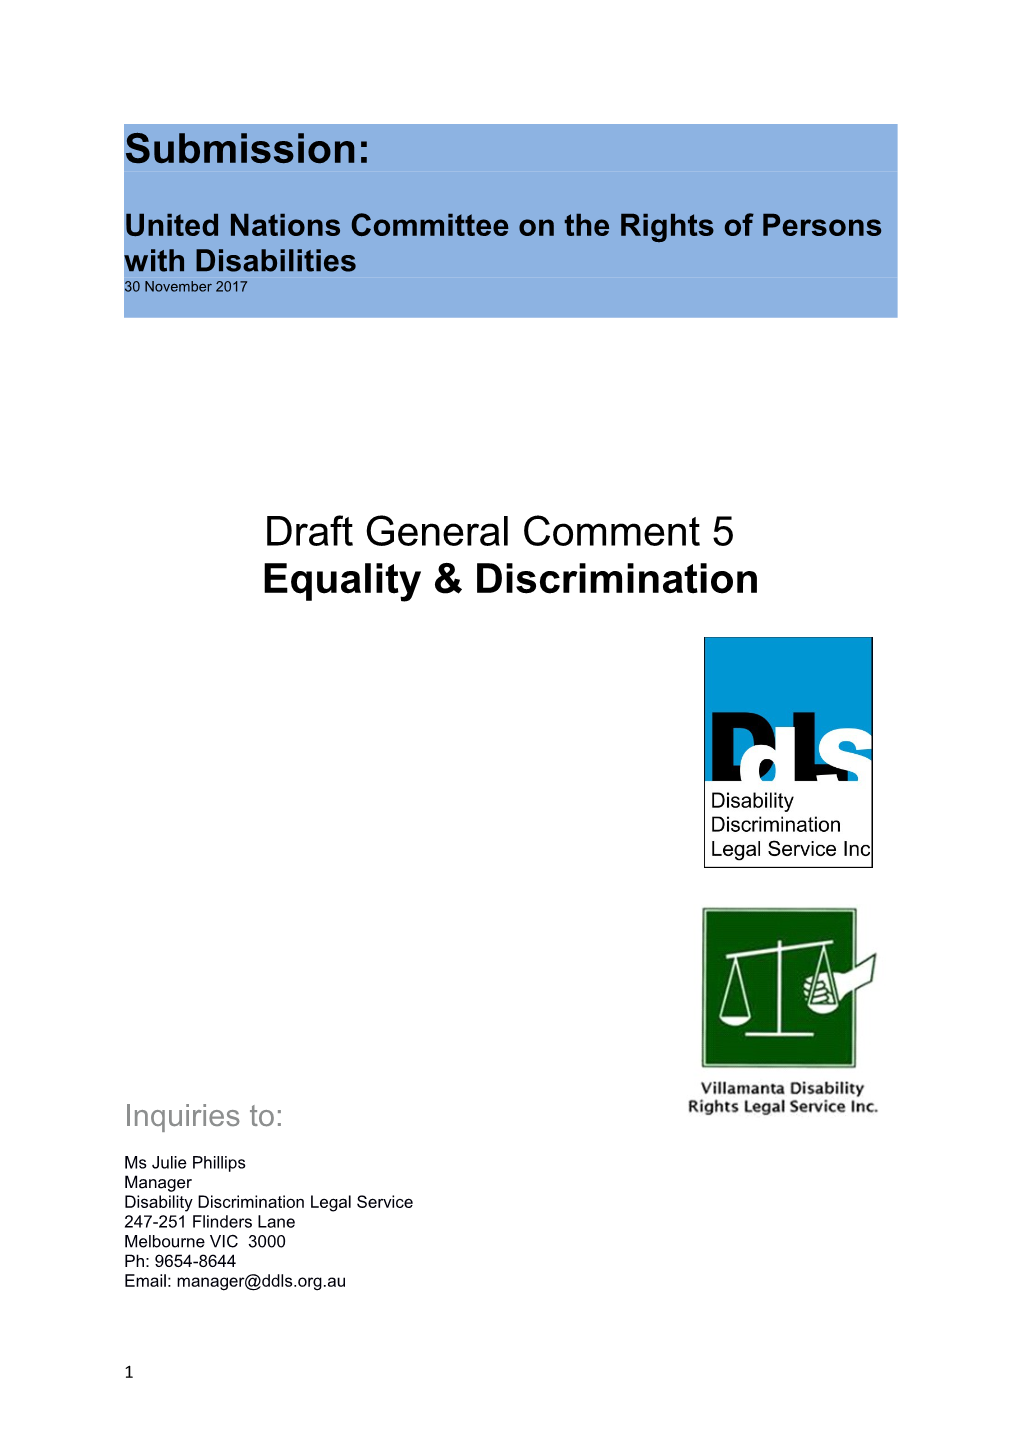 United Nations Committee on the Rights of Persons with Disabilities